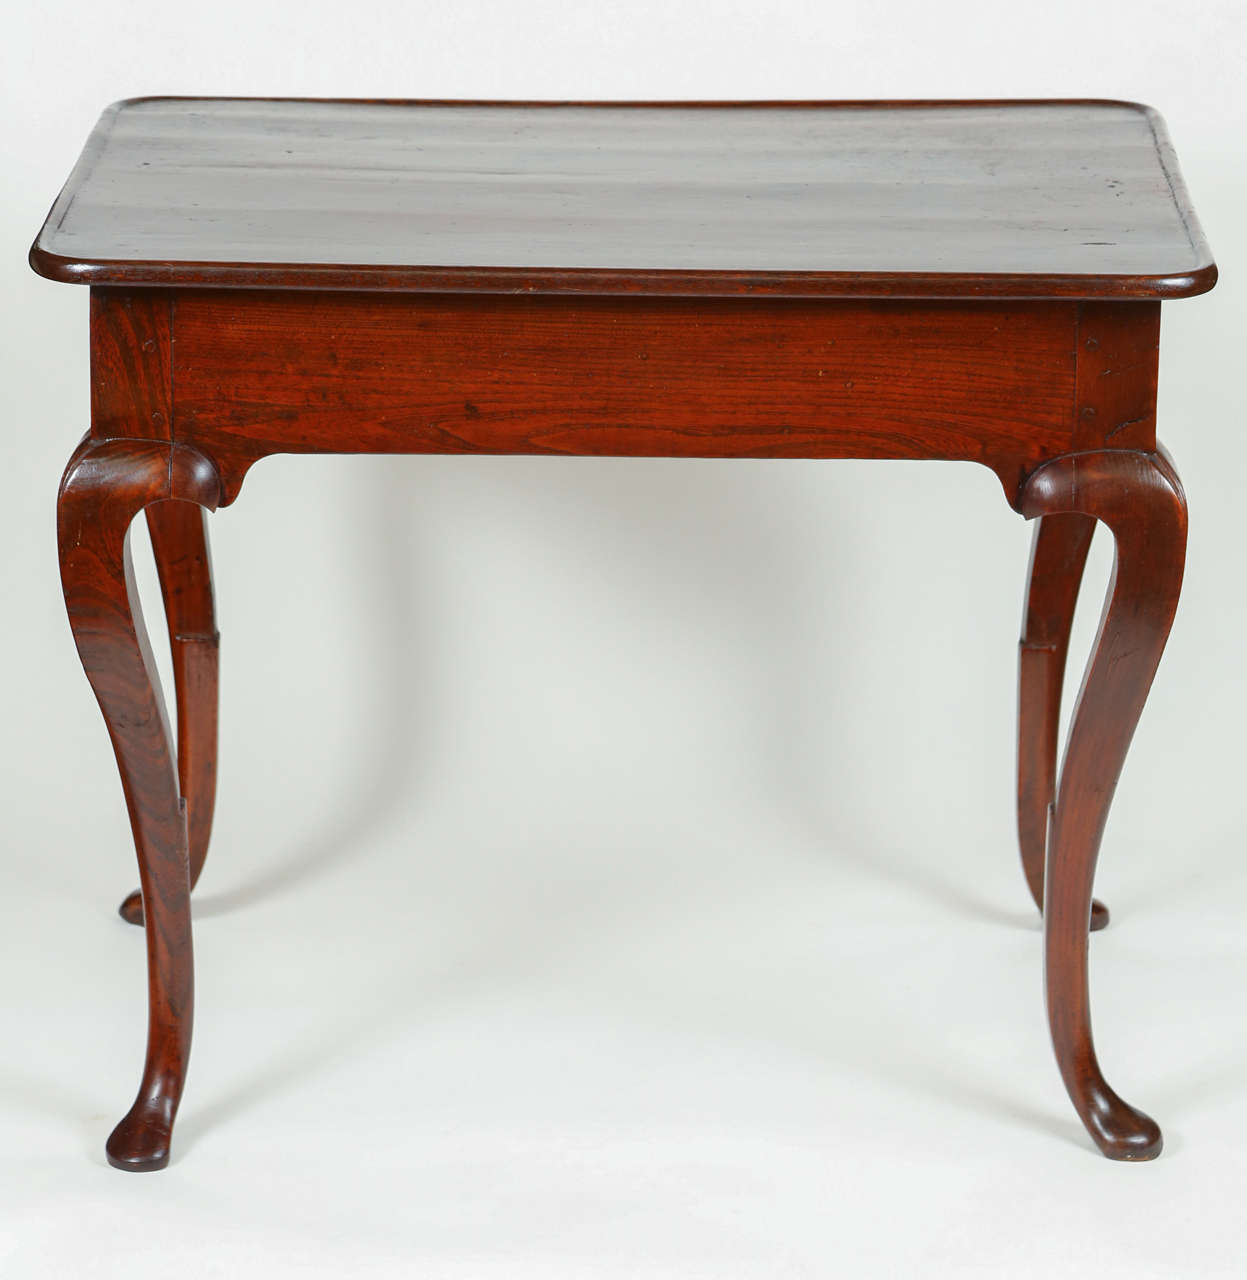 18th Century chestnut Portuguese Side Table features a single drawer, cabriolet style legs with pad feet, and a moulded top. Executed circa 1760s in Portugal. 
Dimensions: 33 1/4